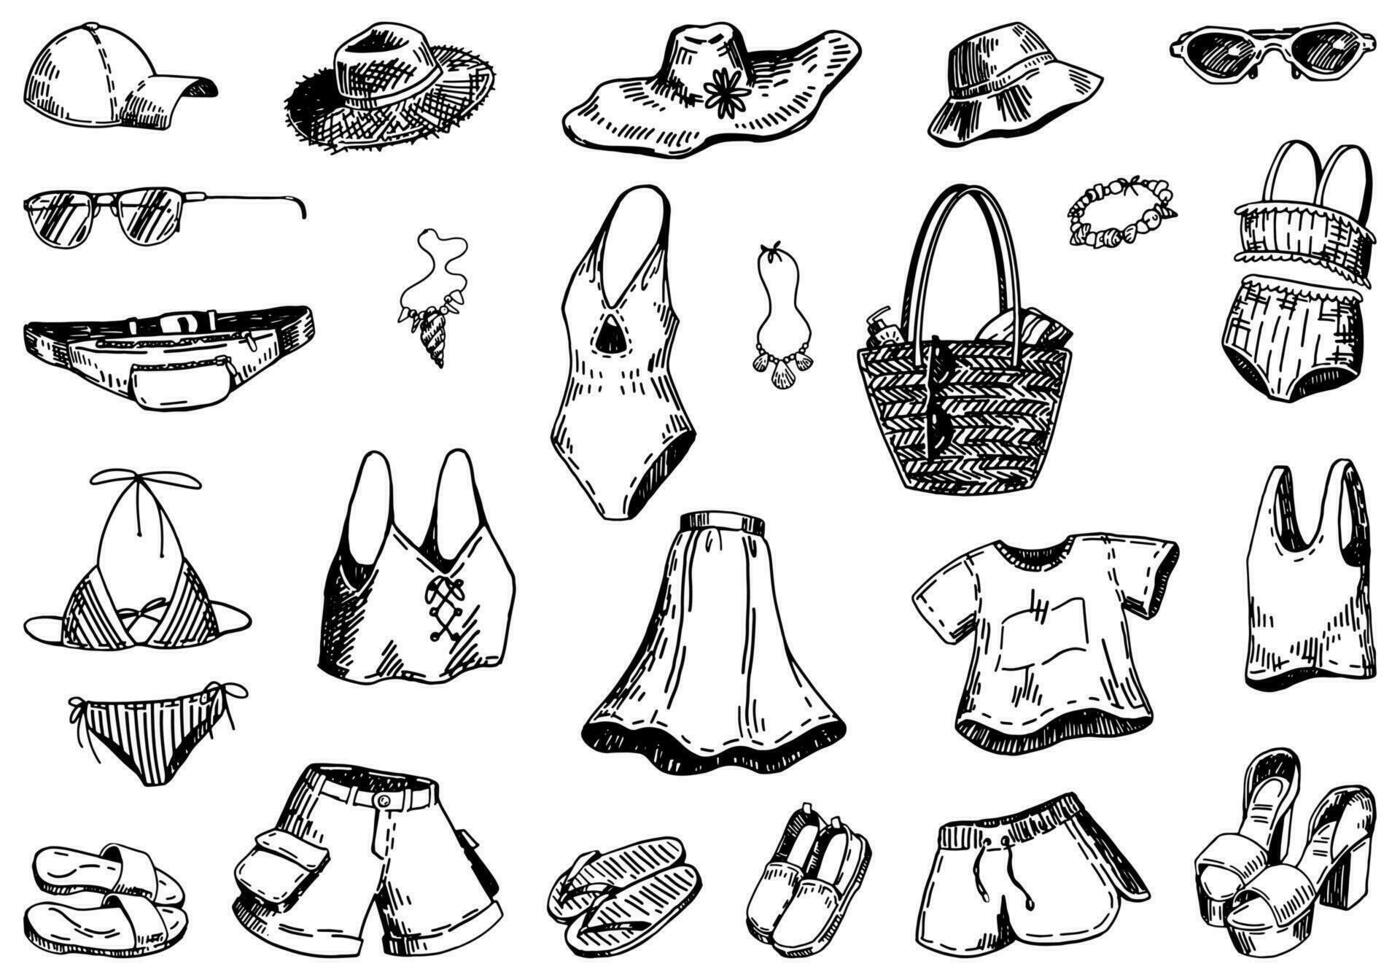 Summer time sketches collection. Drawings set of clothes, accesories, bags, hats, swimsuits. Hand drawn vector illustrations. Cliparts isolated on white.